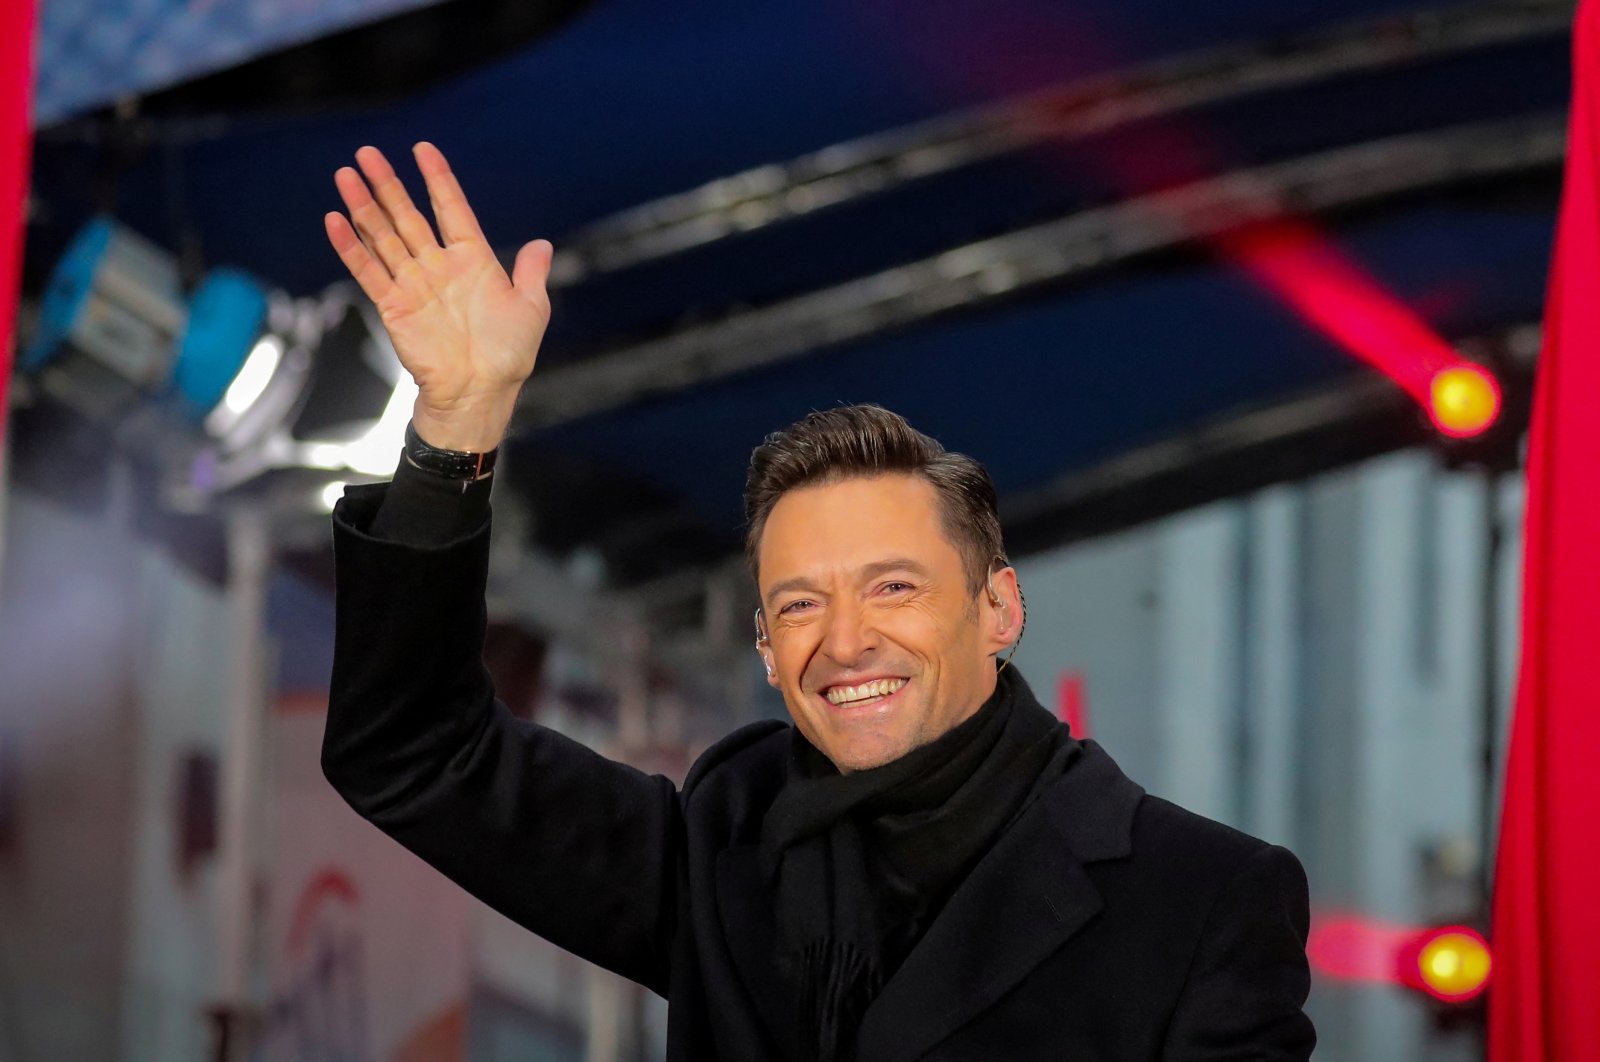 Hugh Jackman waves during his performance on NBC&#039;s &quot;Today&quot; show in New York City, U.S., Dec. 4, 2018. (Reuters Photo)